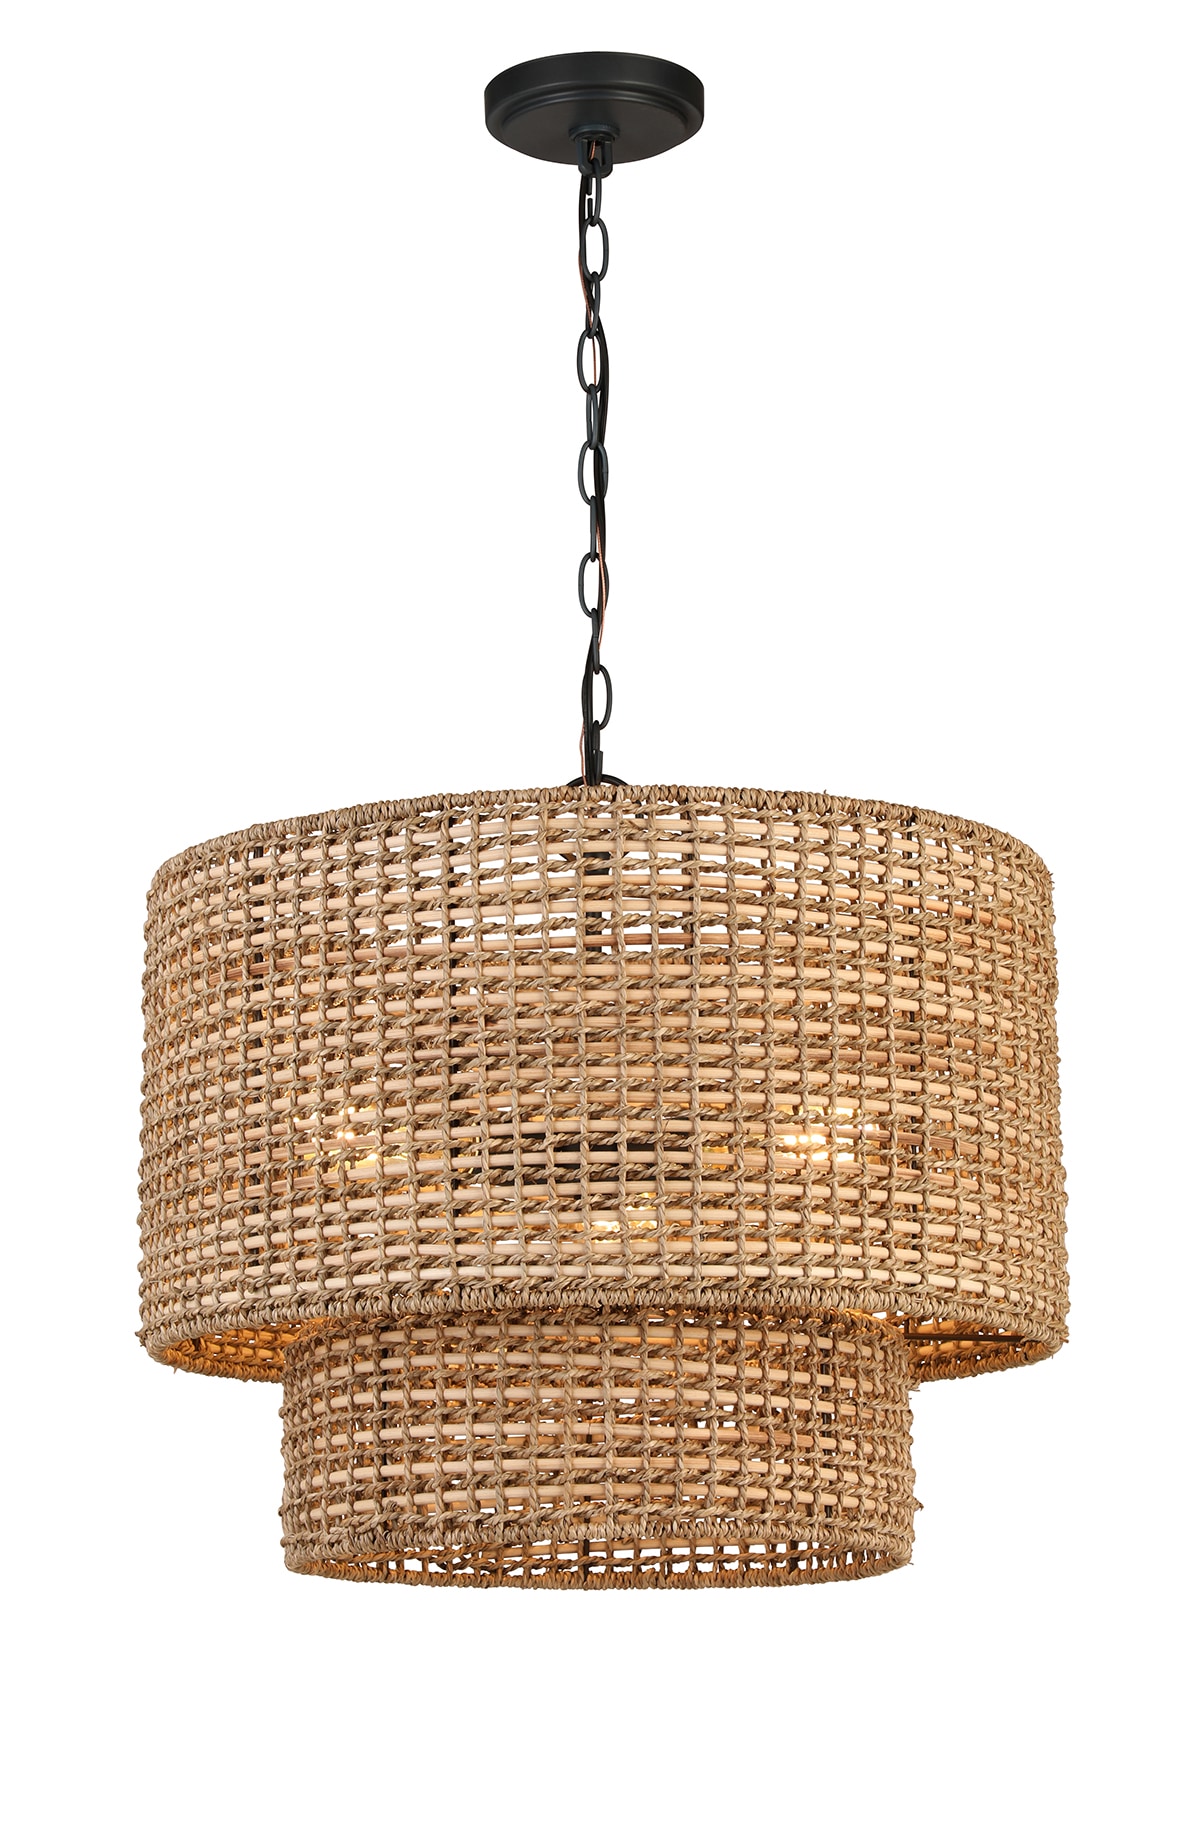 Pendant Light In The Lighting, Can You Change The Shade On A Pendant Light